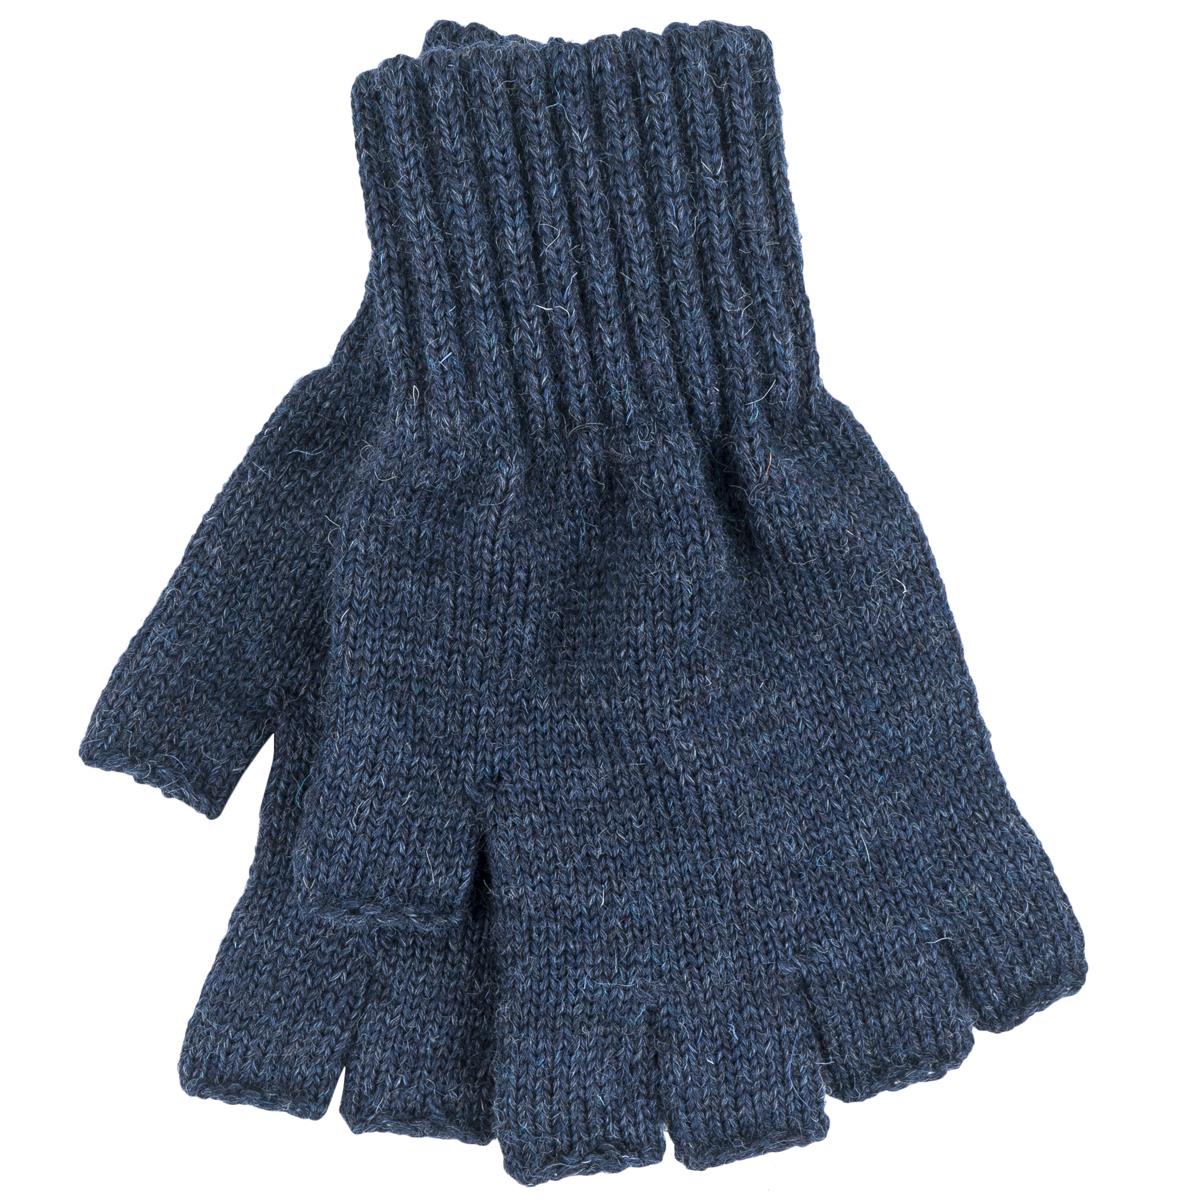 What colors and sizes are offered for Barbour fingerless gloves?